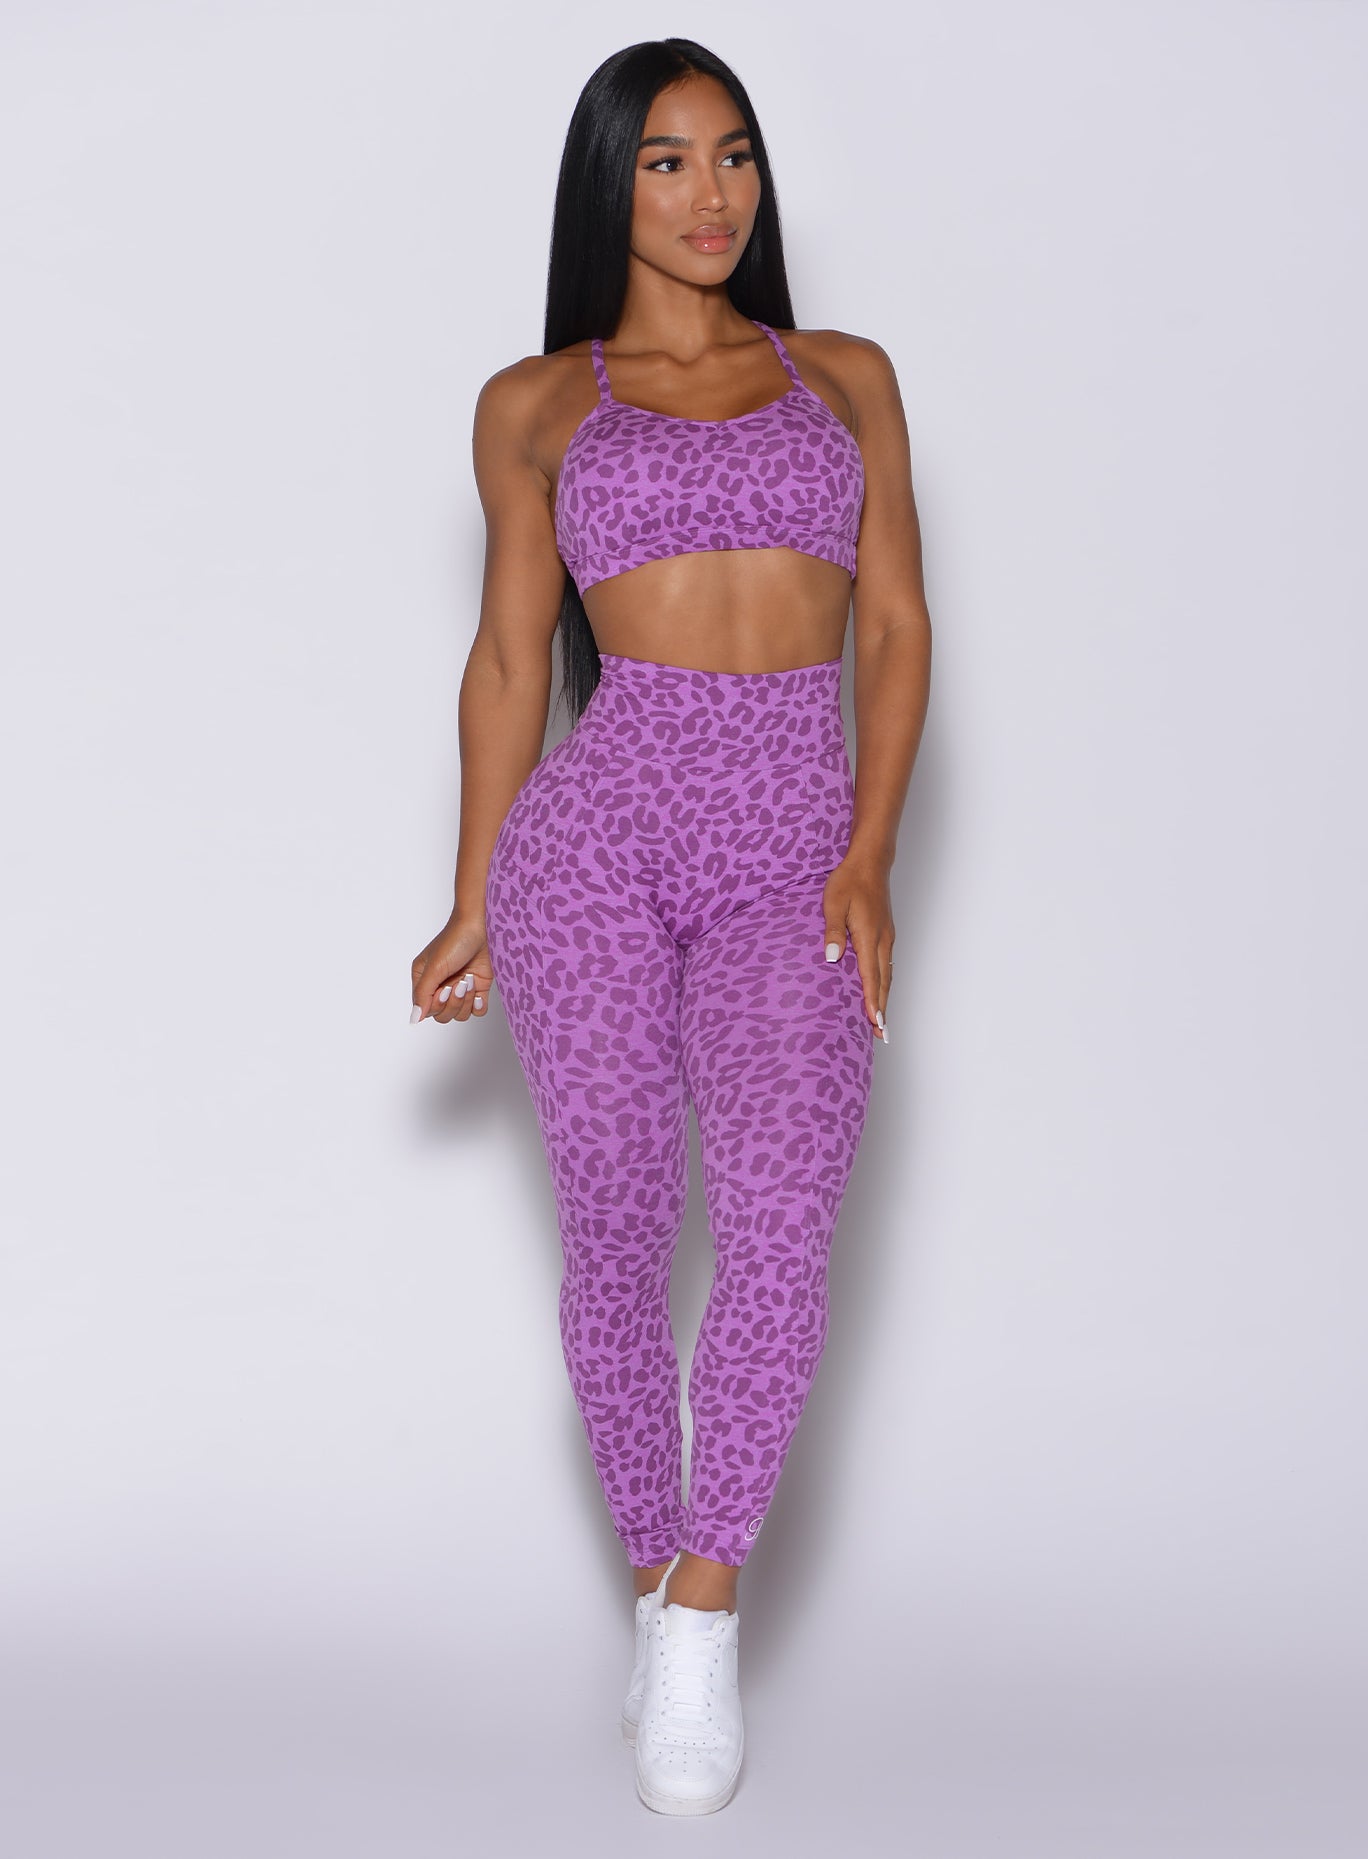 Front profile view of a model in our curves leggings in purple cheetah color and a matching sports bra